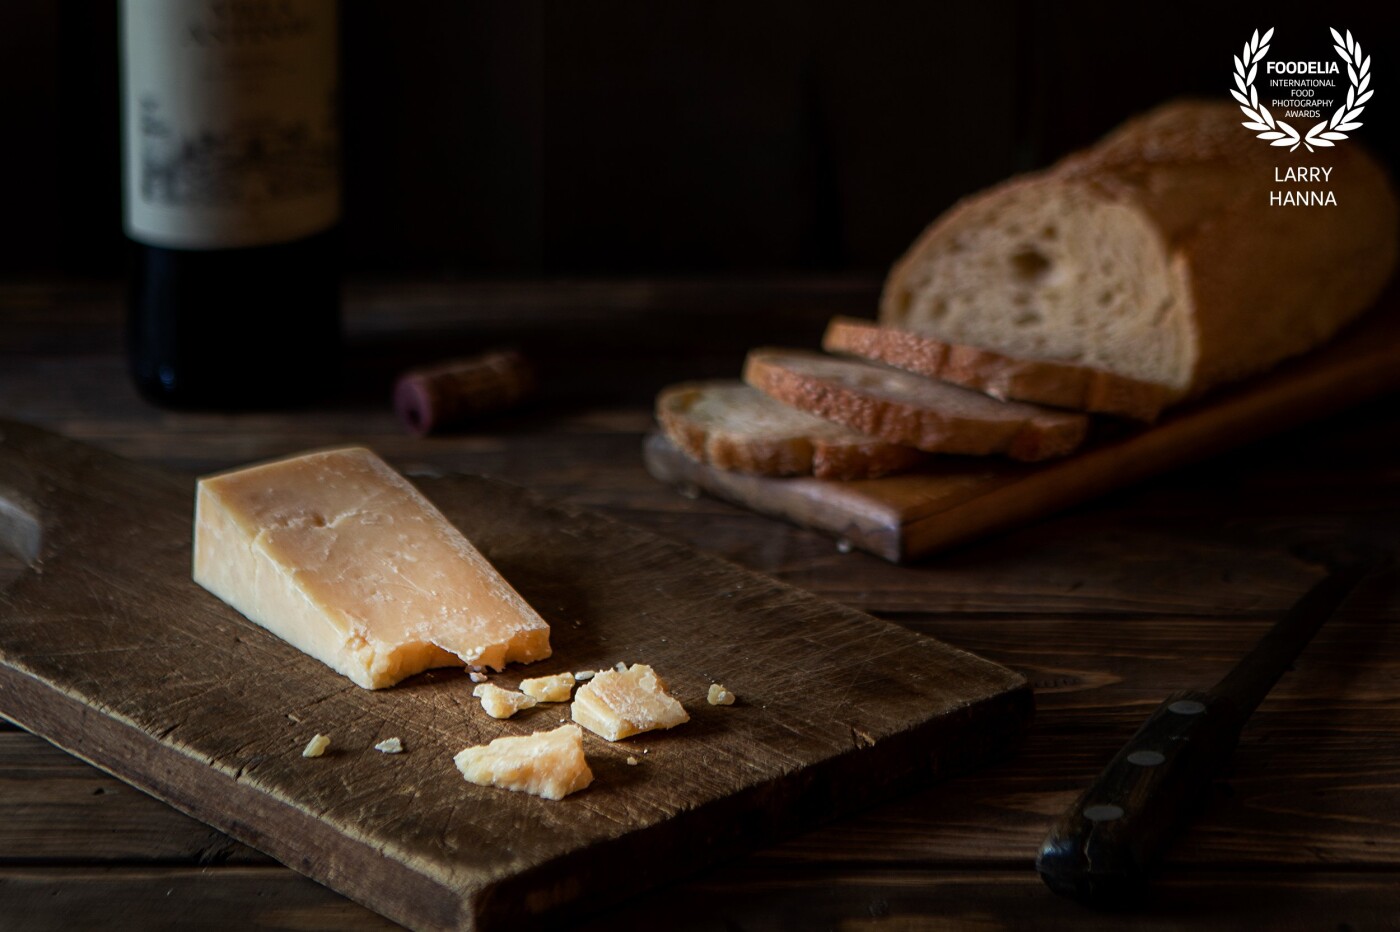 In the evening, I love to break off bites of a good parmesan cheese and combine with a good red wine and bread.  I created this shot for my own enjoyment.  I created the little set in my breakfast area using only window light to tell the story.